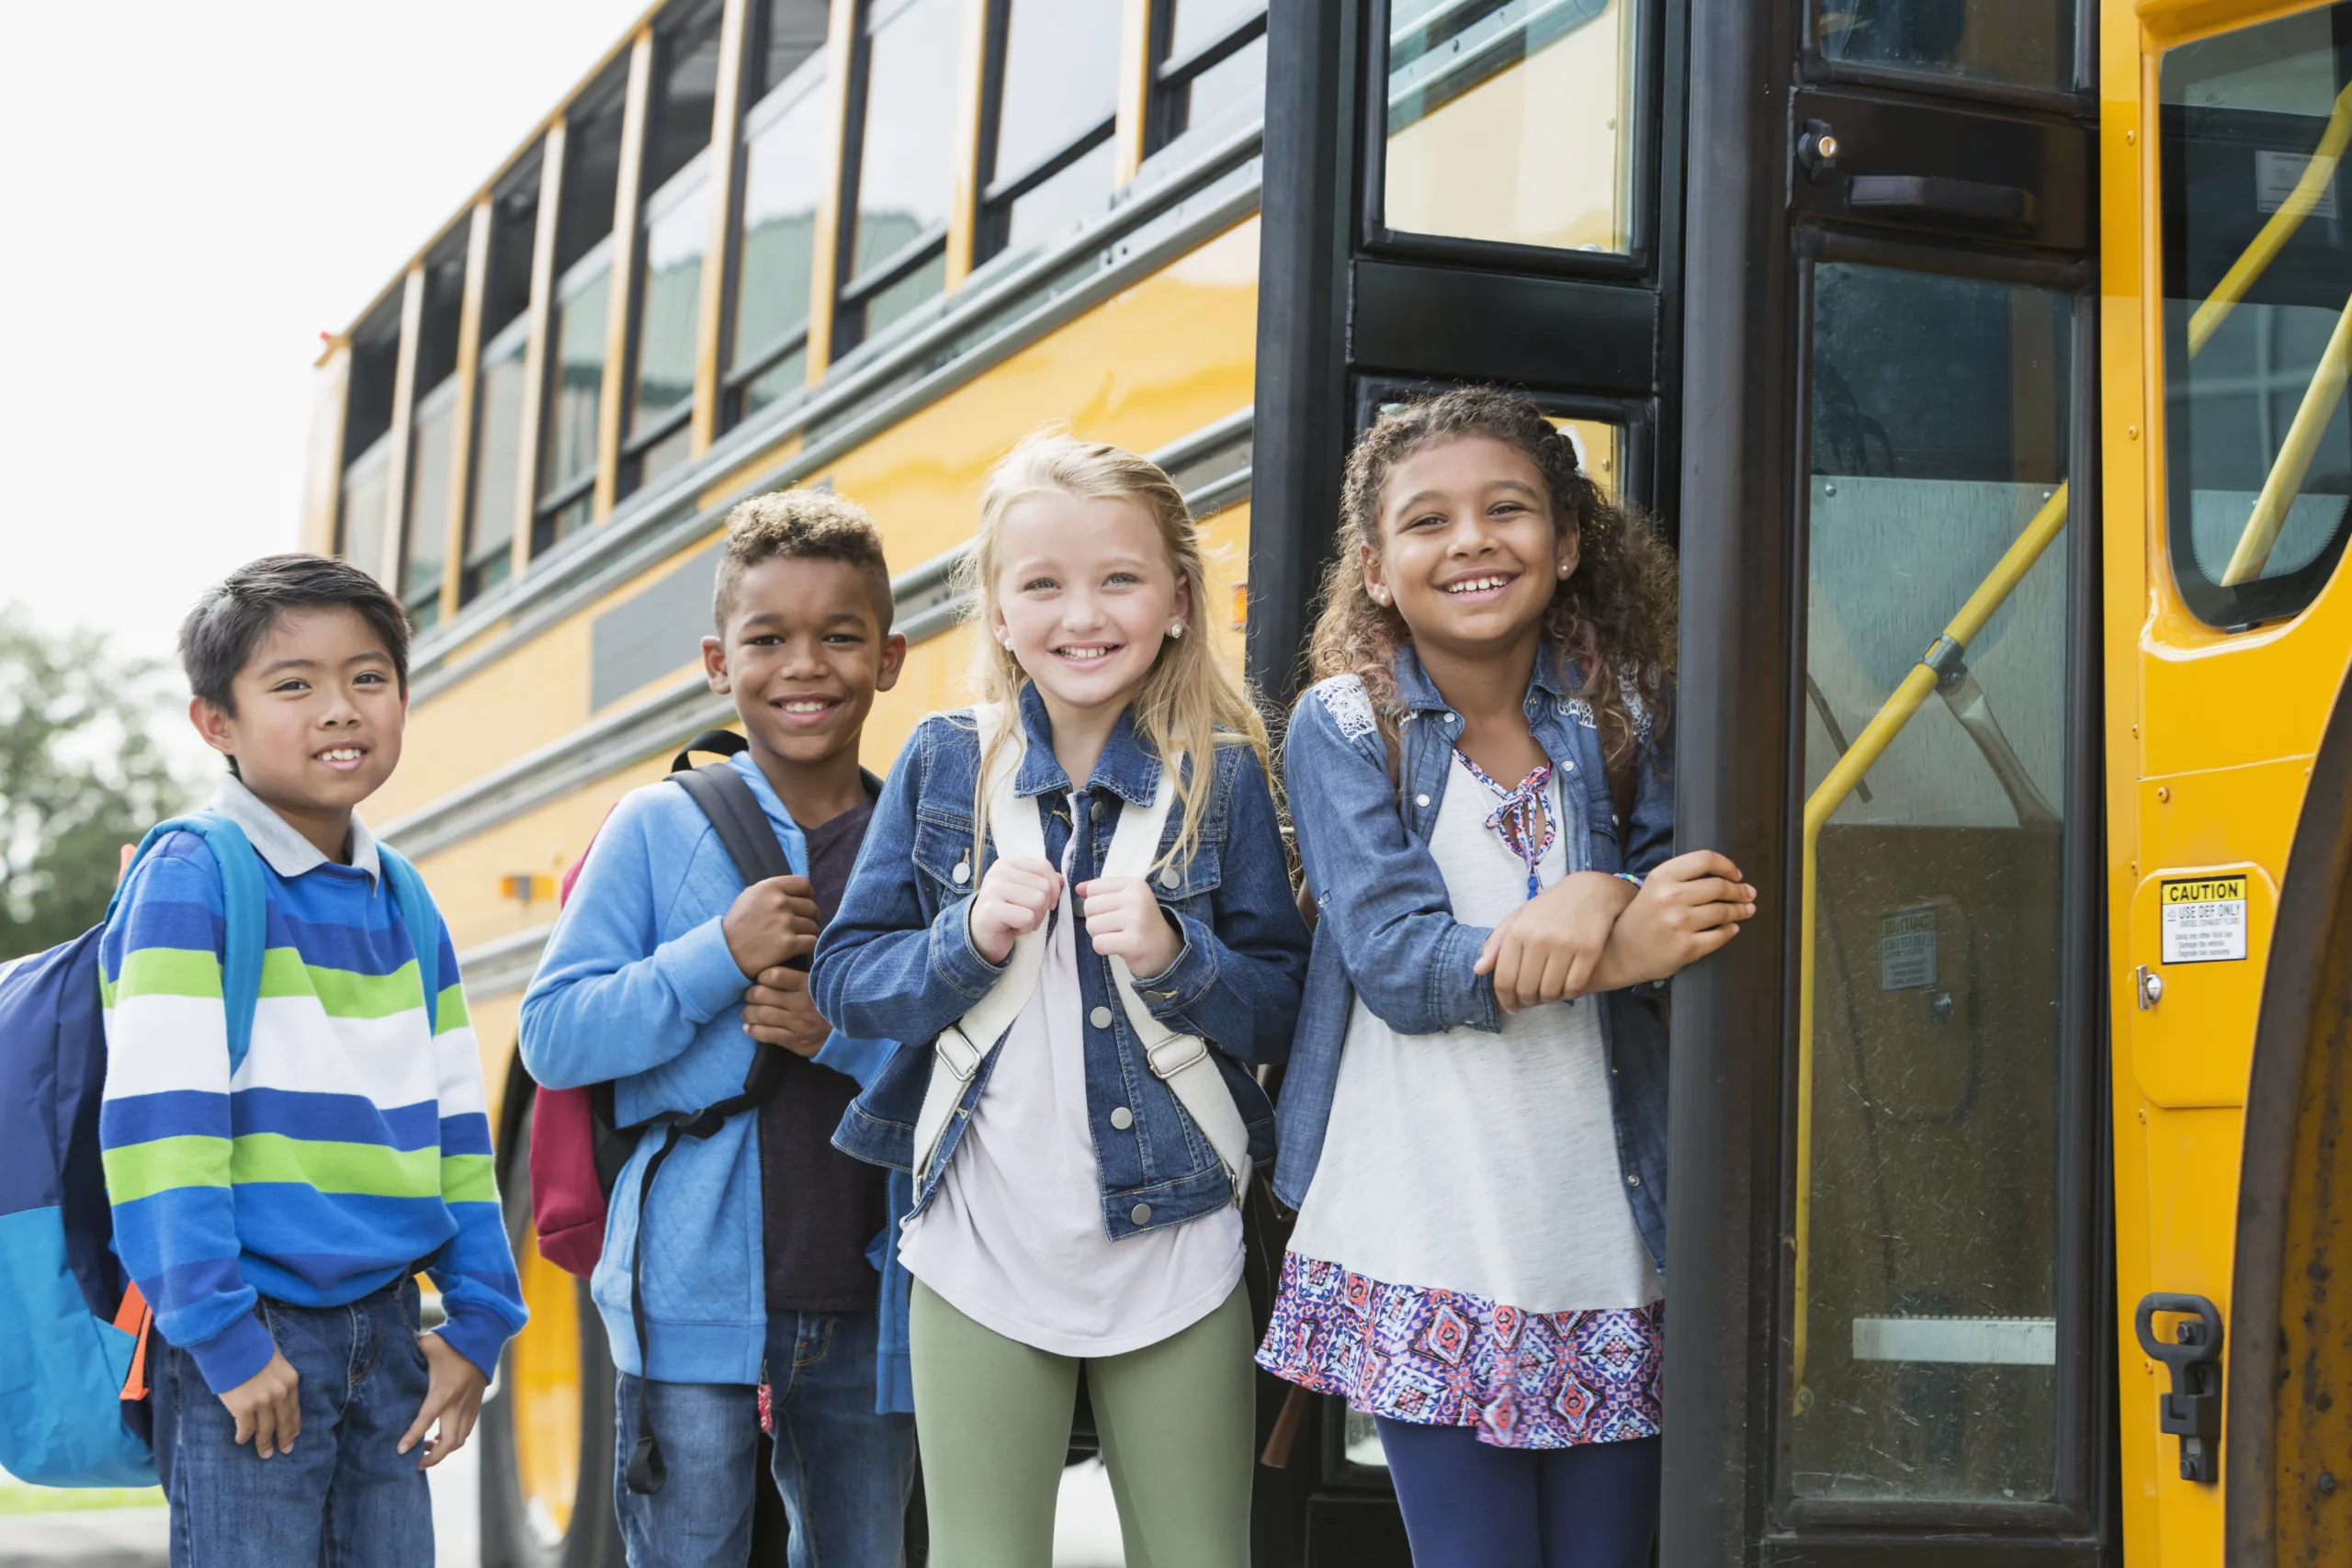 Young students with backpacks smiling about to board the yellow school bus